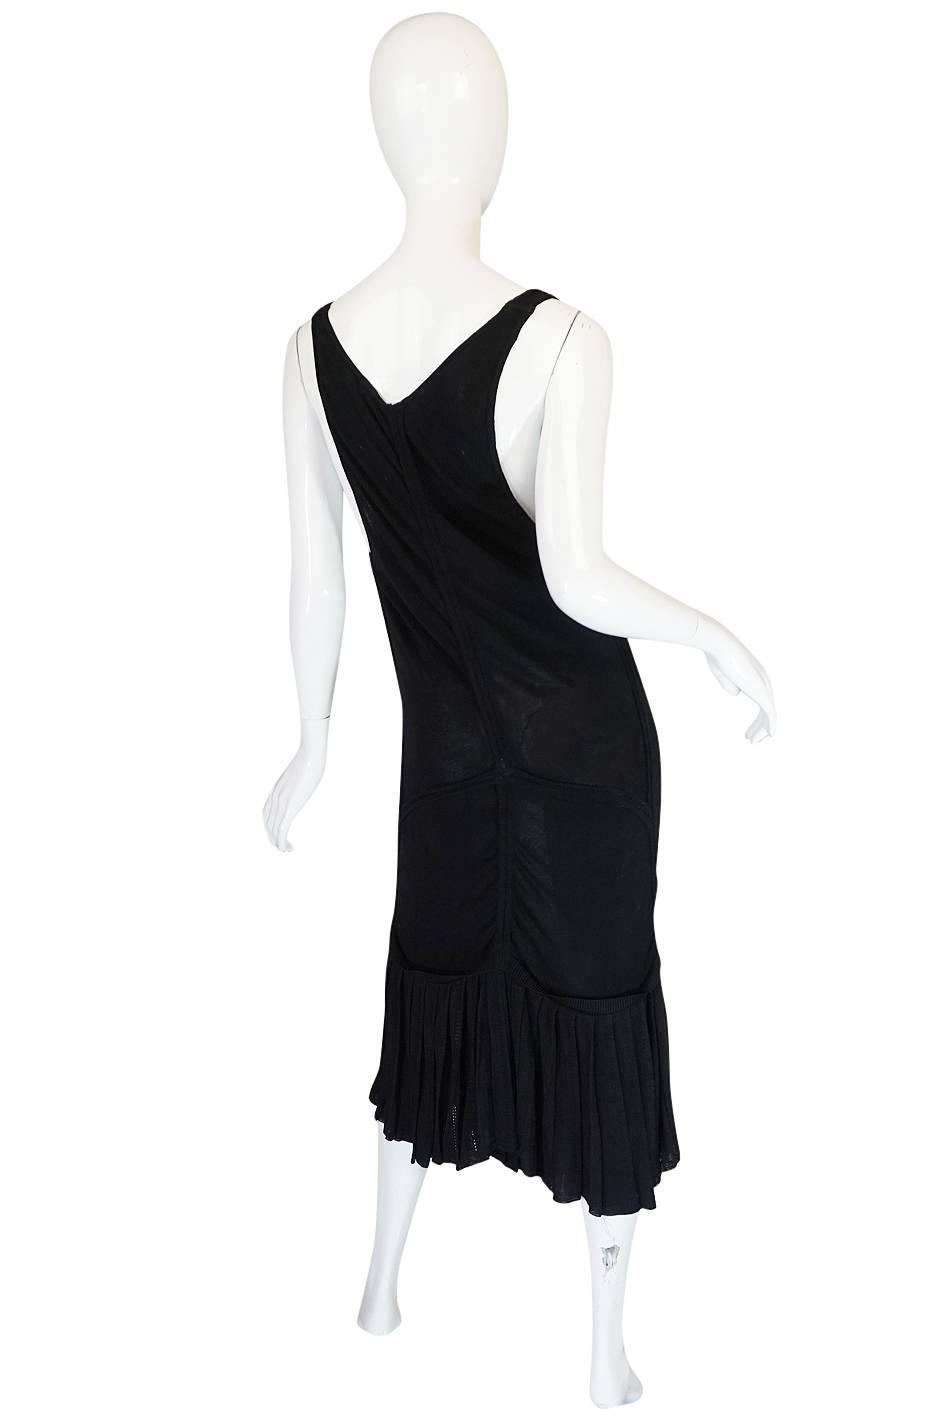 Insanely sexy, this low scooped front Azzedine Alaia dress from the 1990 collection has that in your face sensuality  that Alaia is known for. It is made form his signature bandage knit so it clings and hugs the body and your every curve. This one